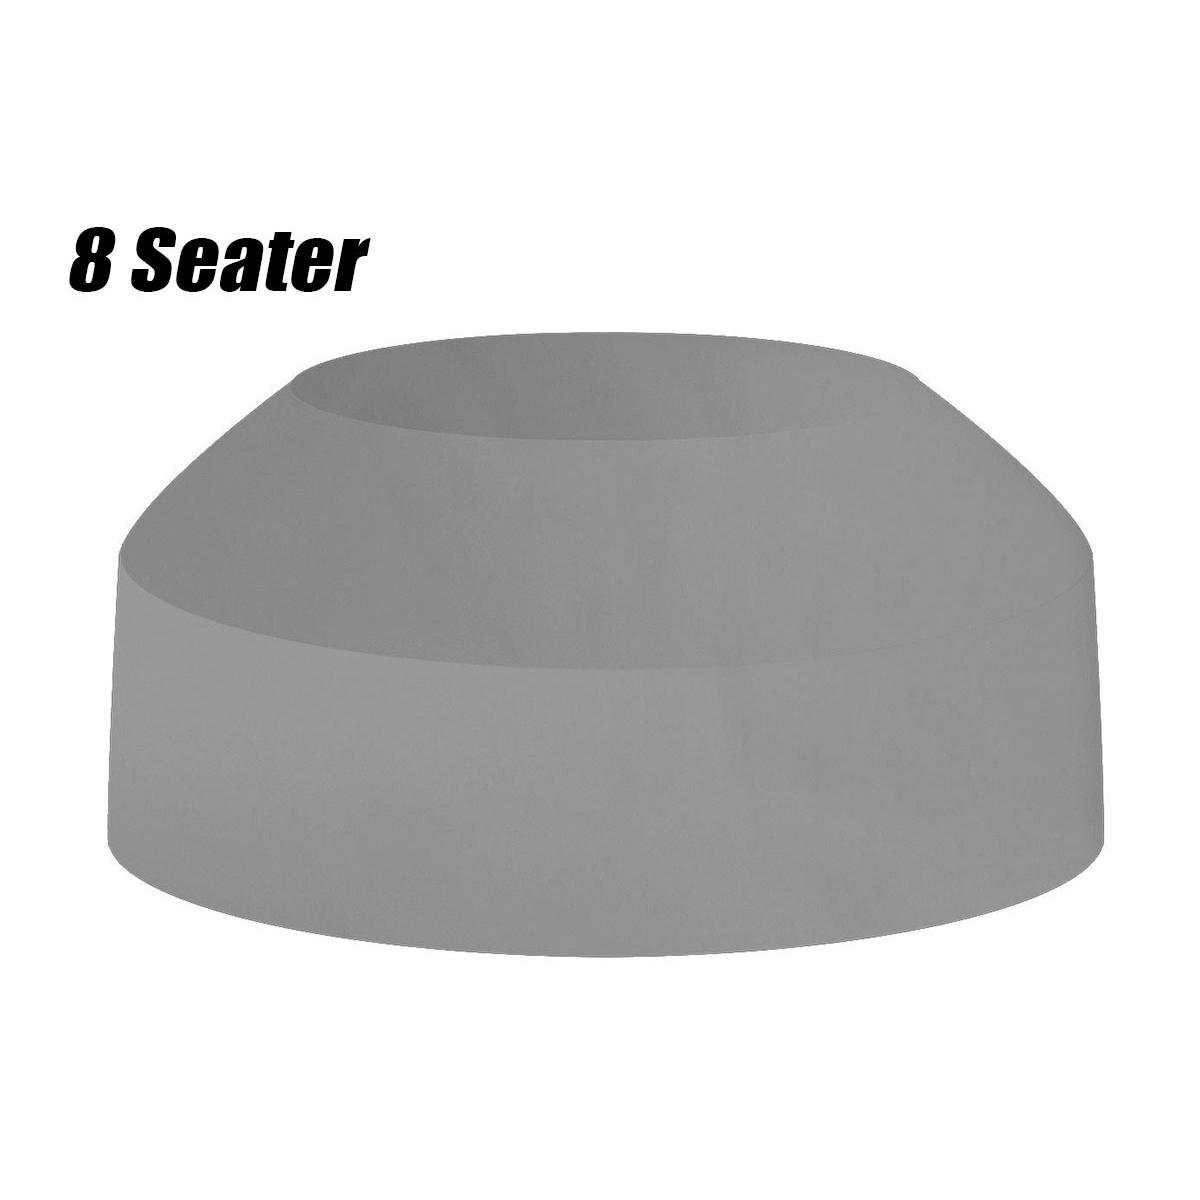 Waterproof Motorcycle Dustproof Cover Outdoor round Tablecloth Home Picnic Table Gray